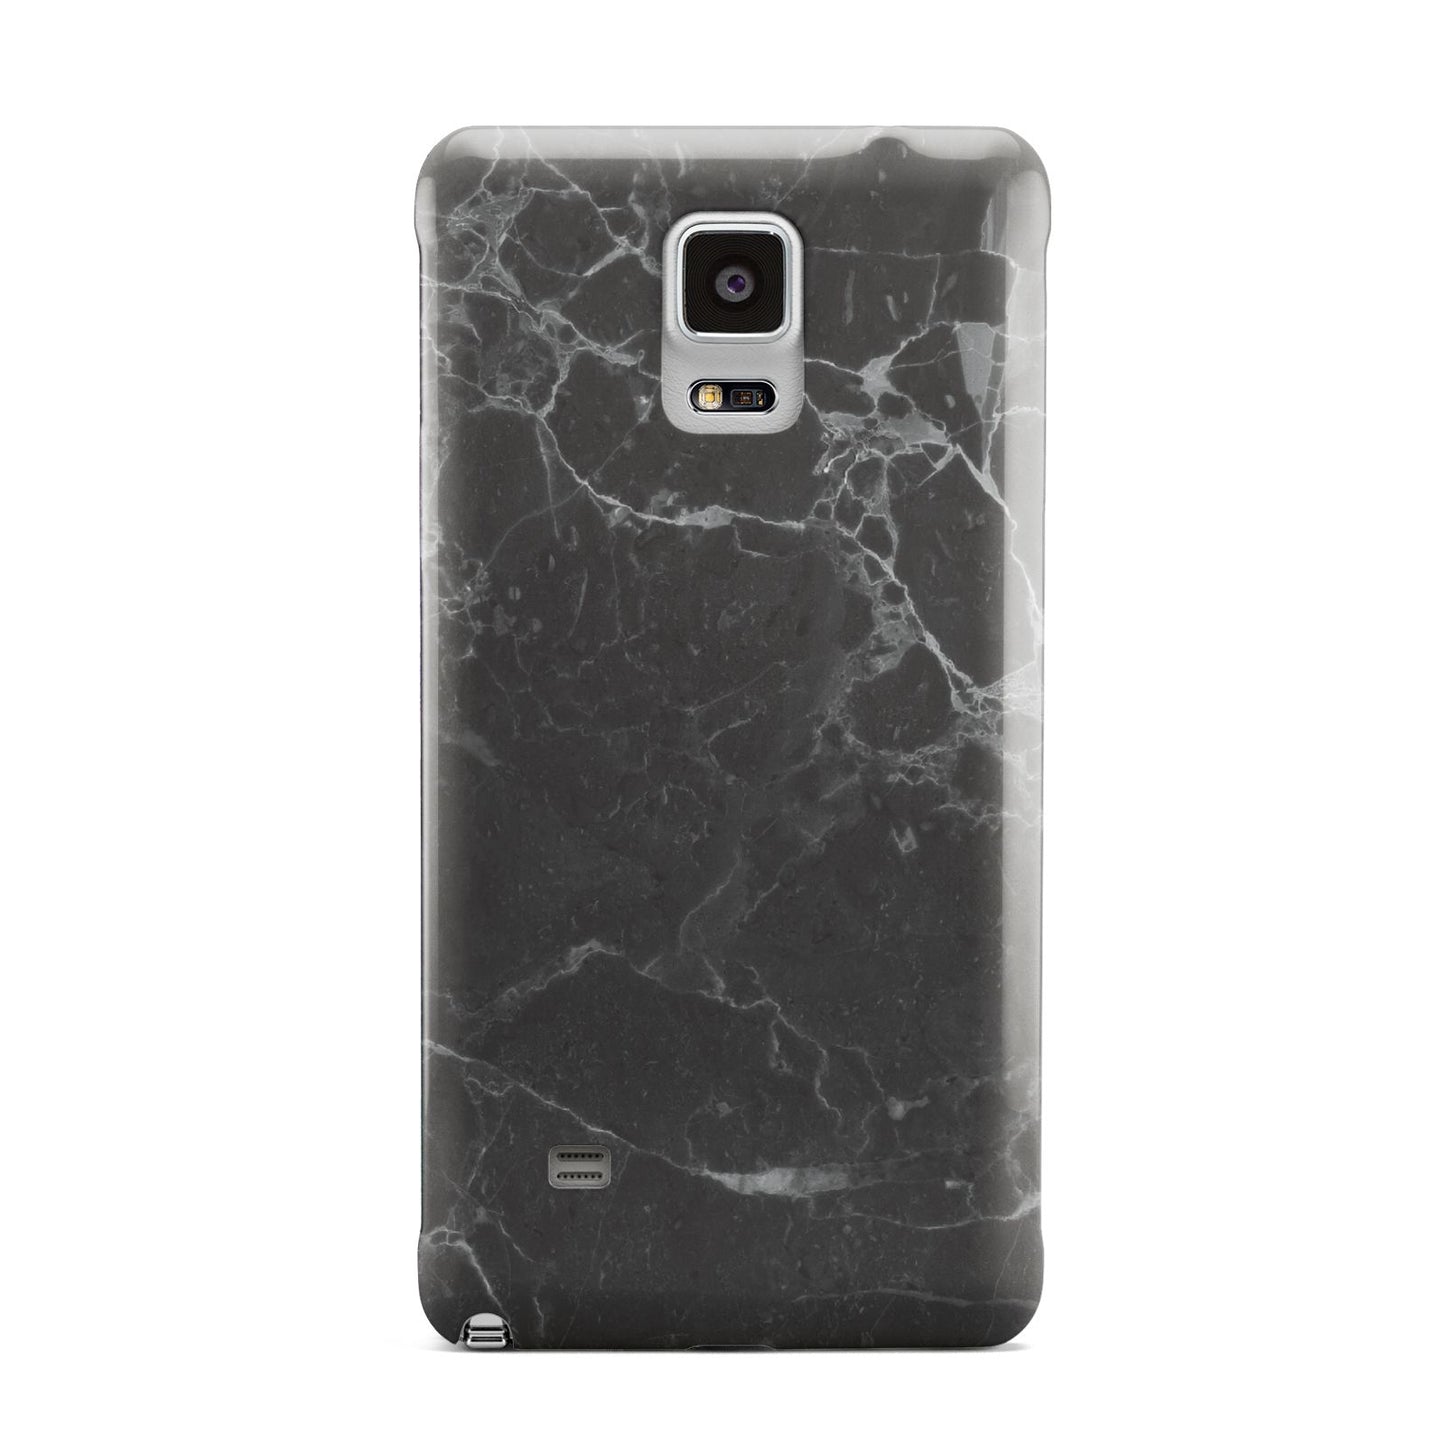 Faux Marble Effect Black Samsung Galaxy Note 4 Case